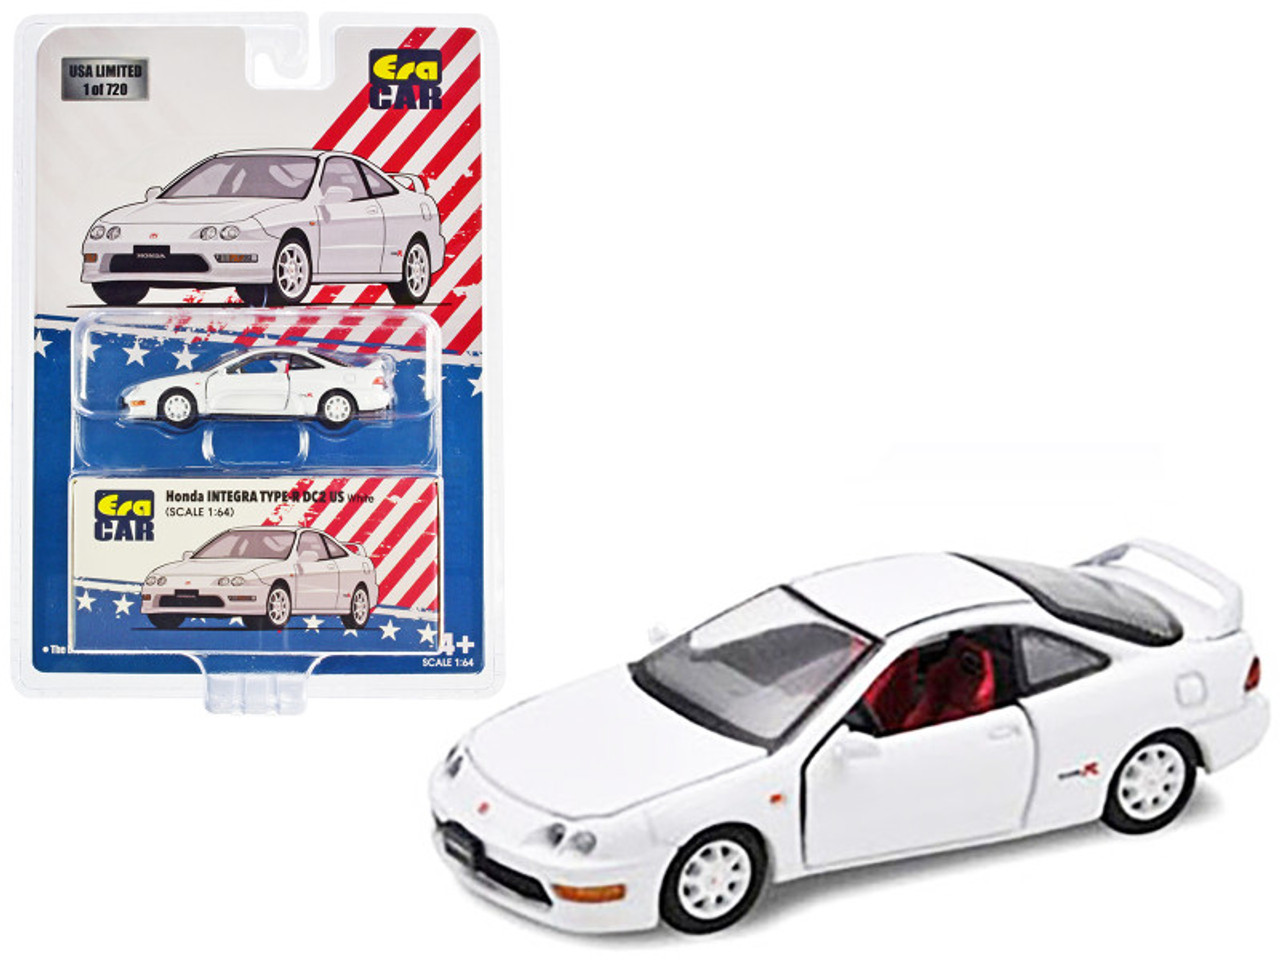 Honda Integra Type-R DC2 US White Limited Edition to 720 pieces Worldwide 1/64  Diecast Model Car by Era Car